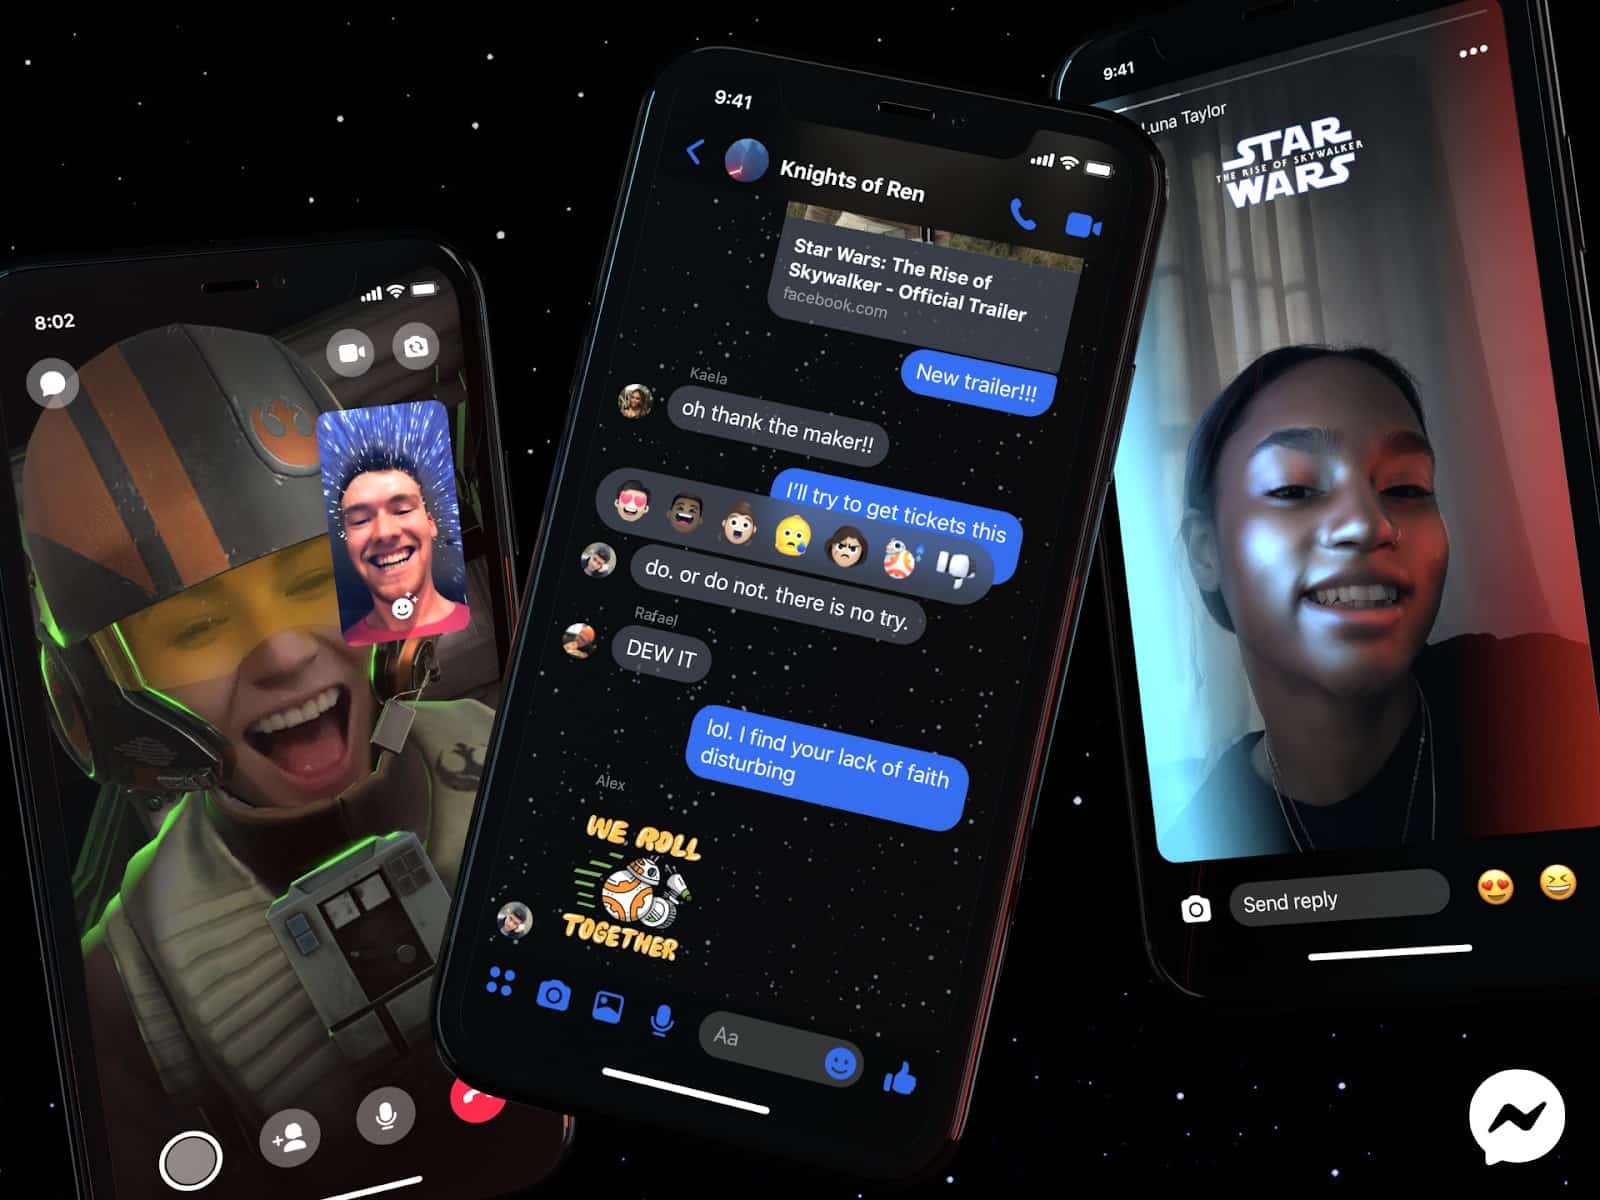 Facebook rolls out Star Wars theme for Messenger